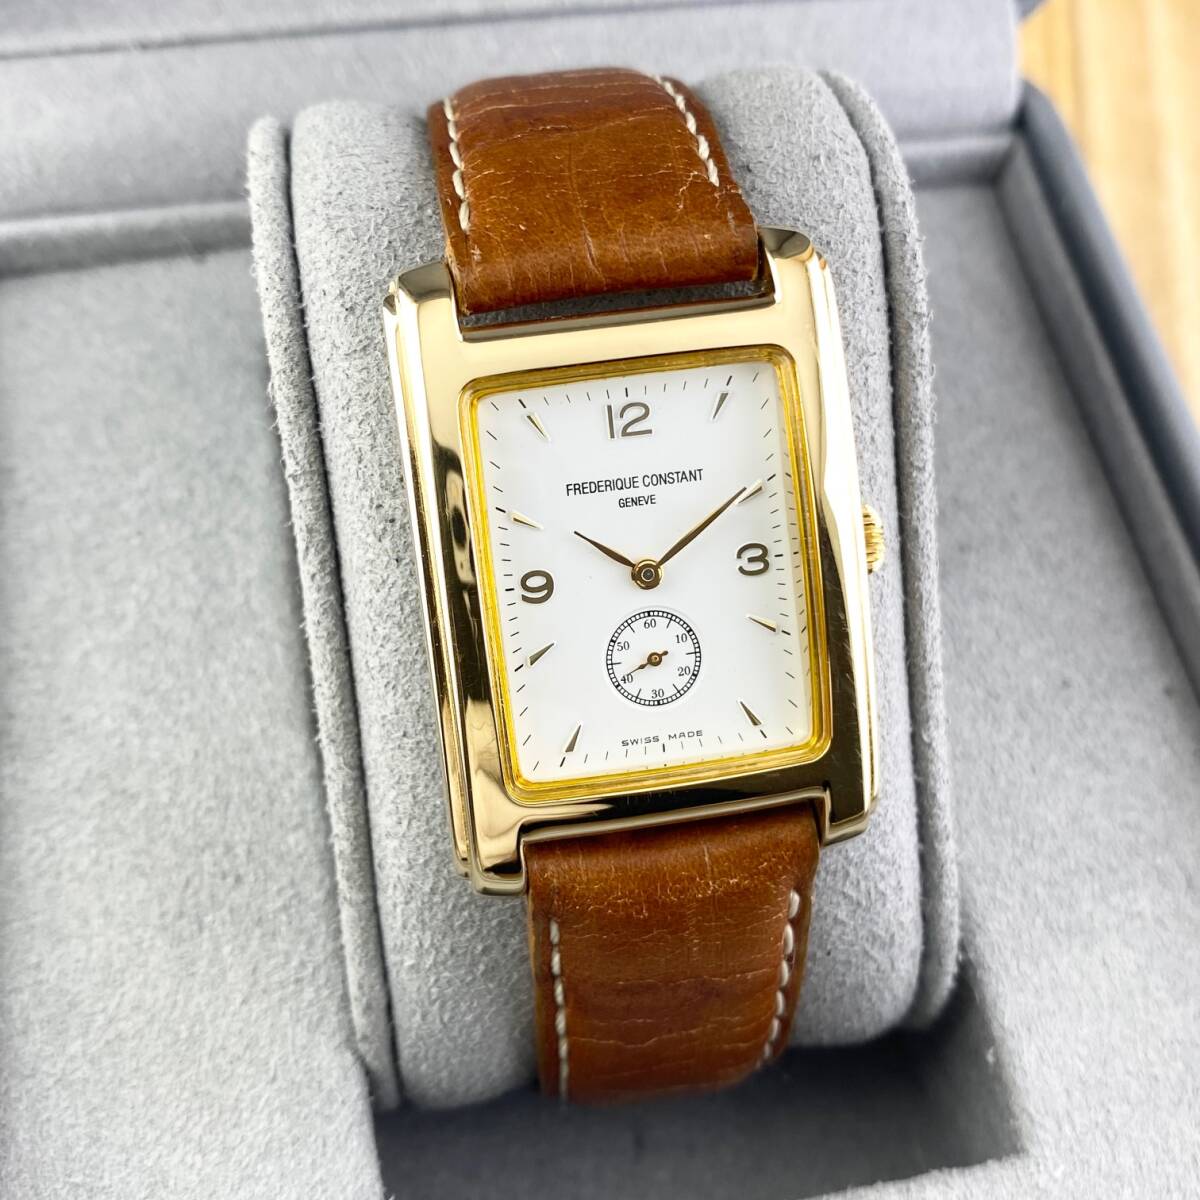 [1 jpy ~]FREDERIQUE CONSTANT Frederique Constant wristwatch men's lady's combined use smoseko white face Gold moveable goods 